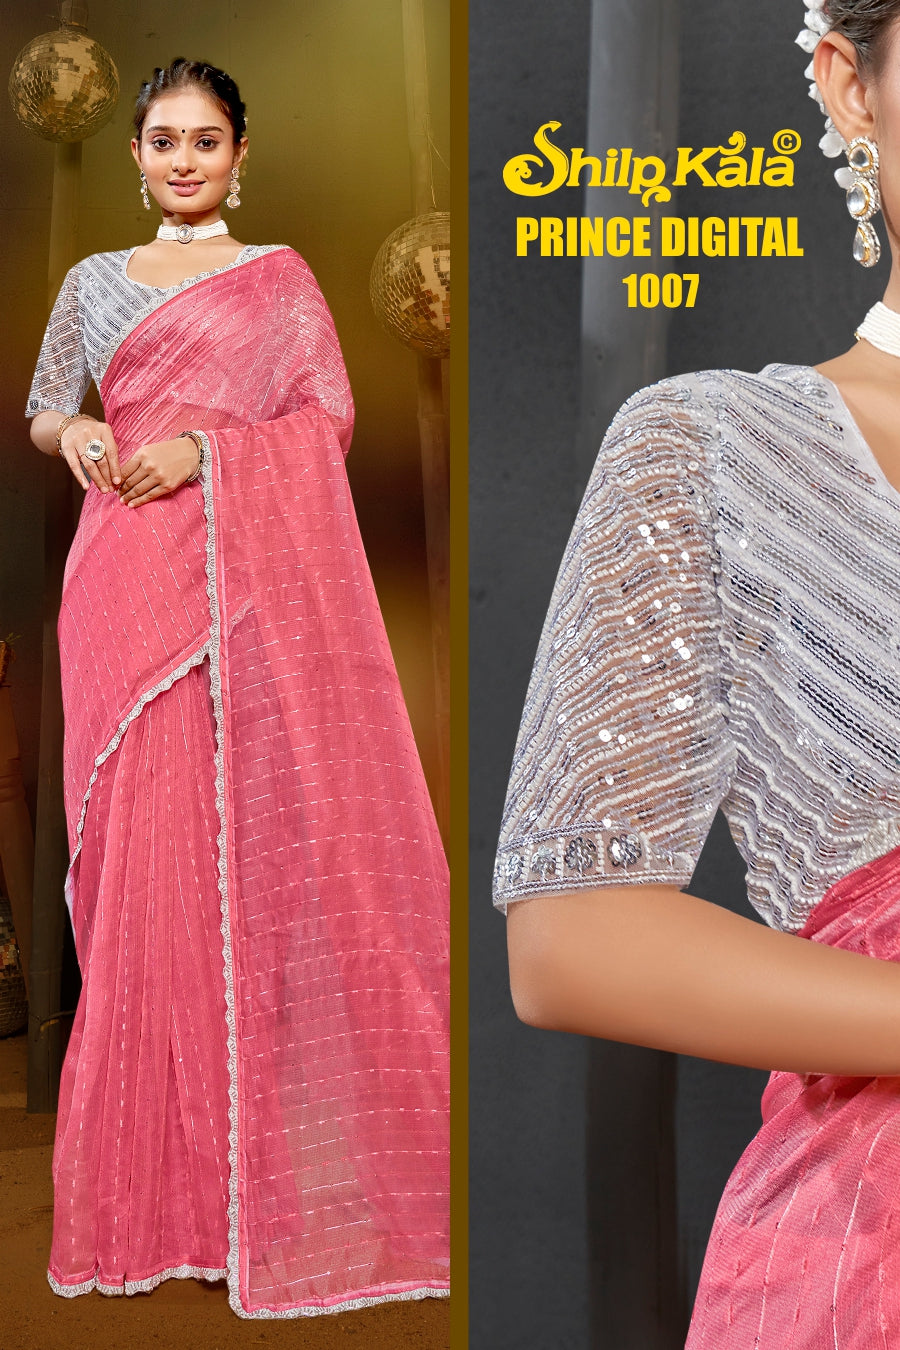 Prince Shilpkala Fashions Fancy Fabric Blouse and Plain Saree with Lace Work